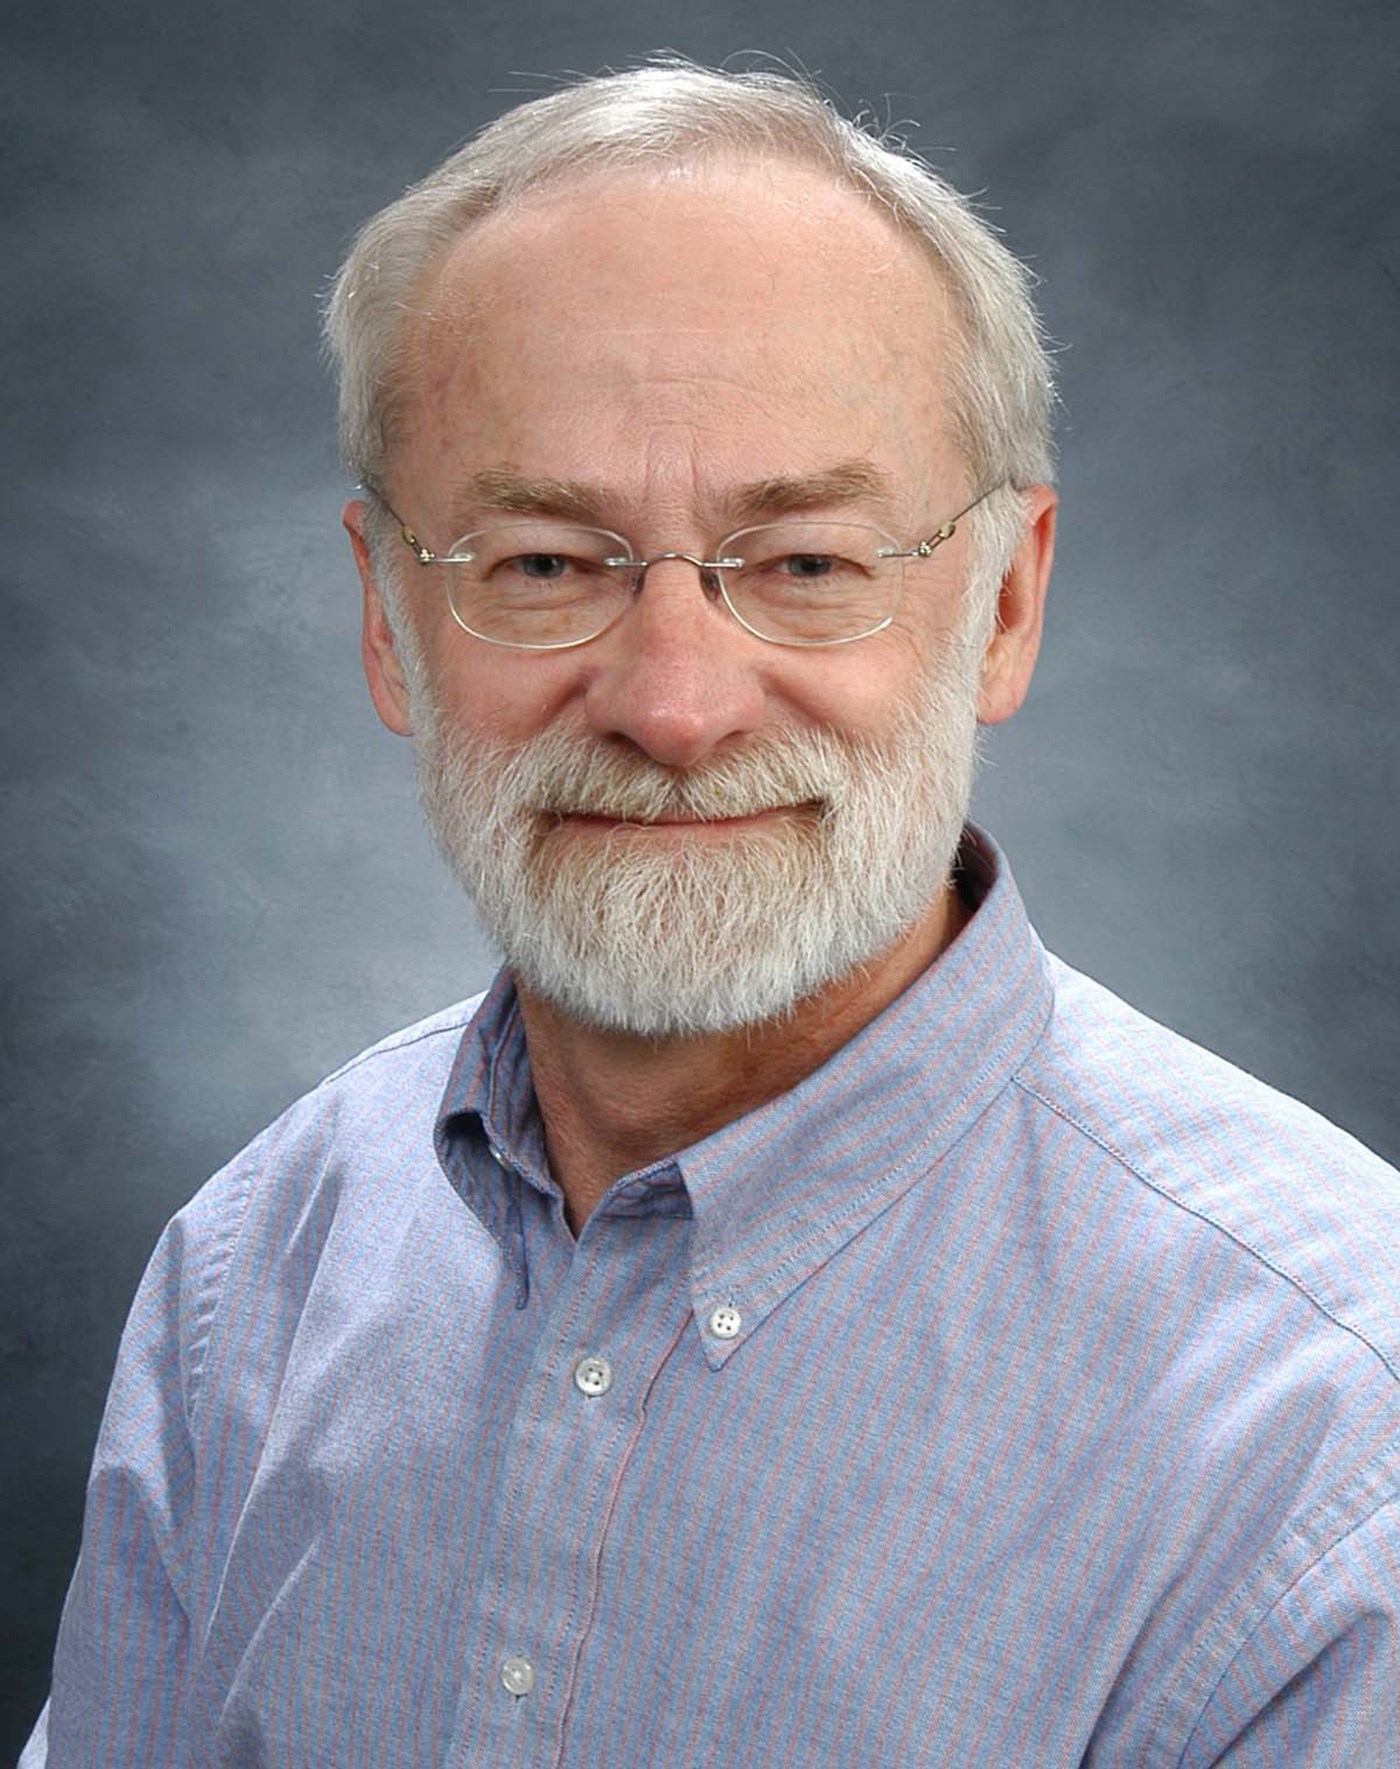 John Duffy is a Professor Emeritus in the DEPARTMENT of Mechanical Engineering at UMass Lowell.